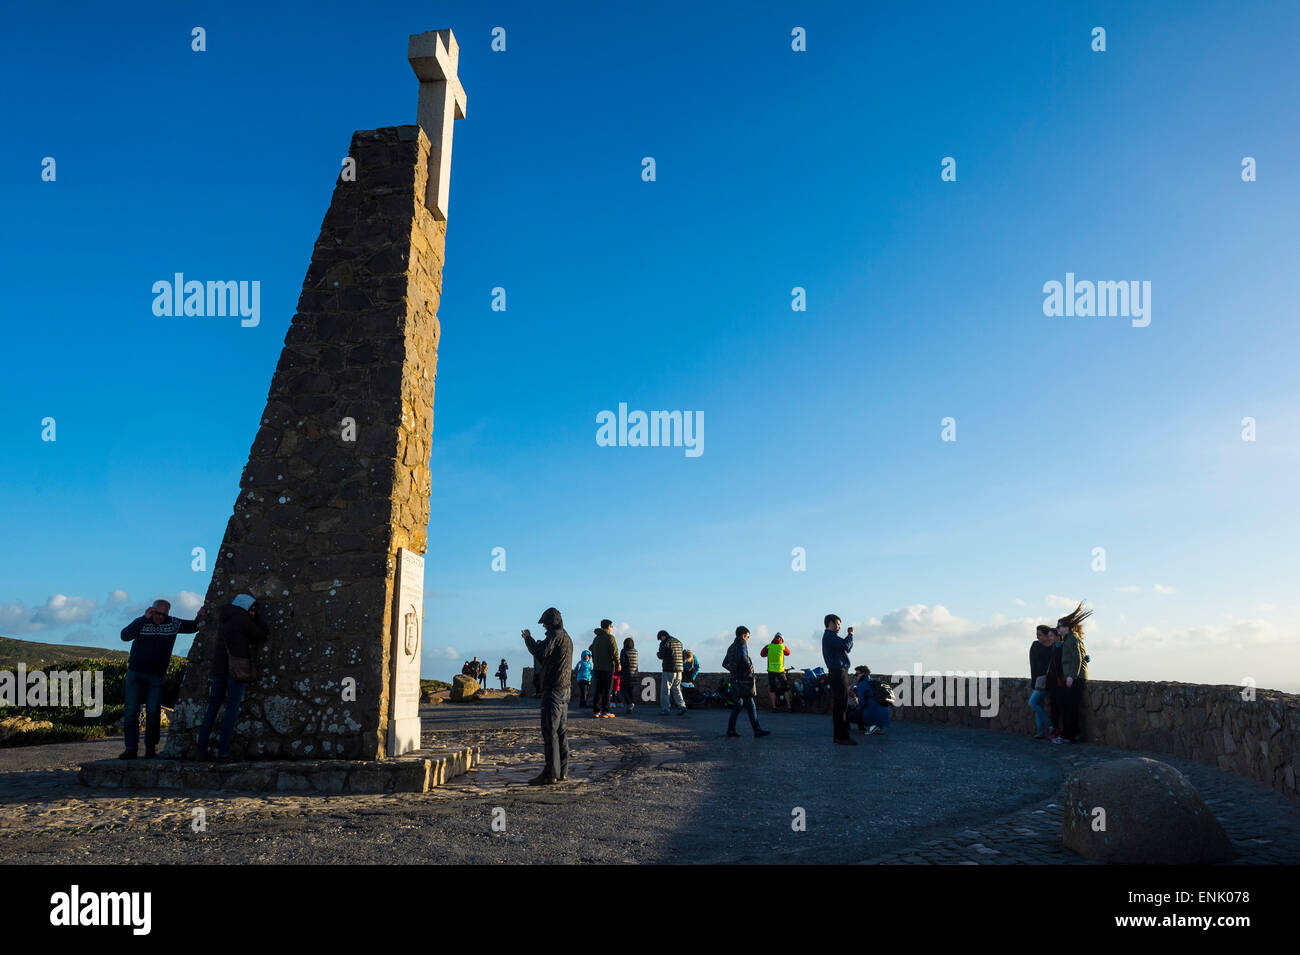 Monument at Europe's most western point, Cabo da Roca, Portugal, Europe Stock Photo